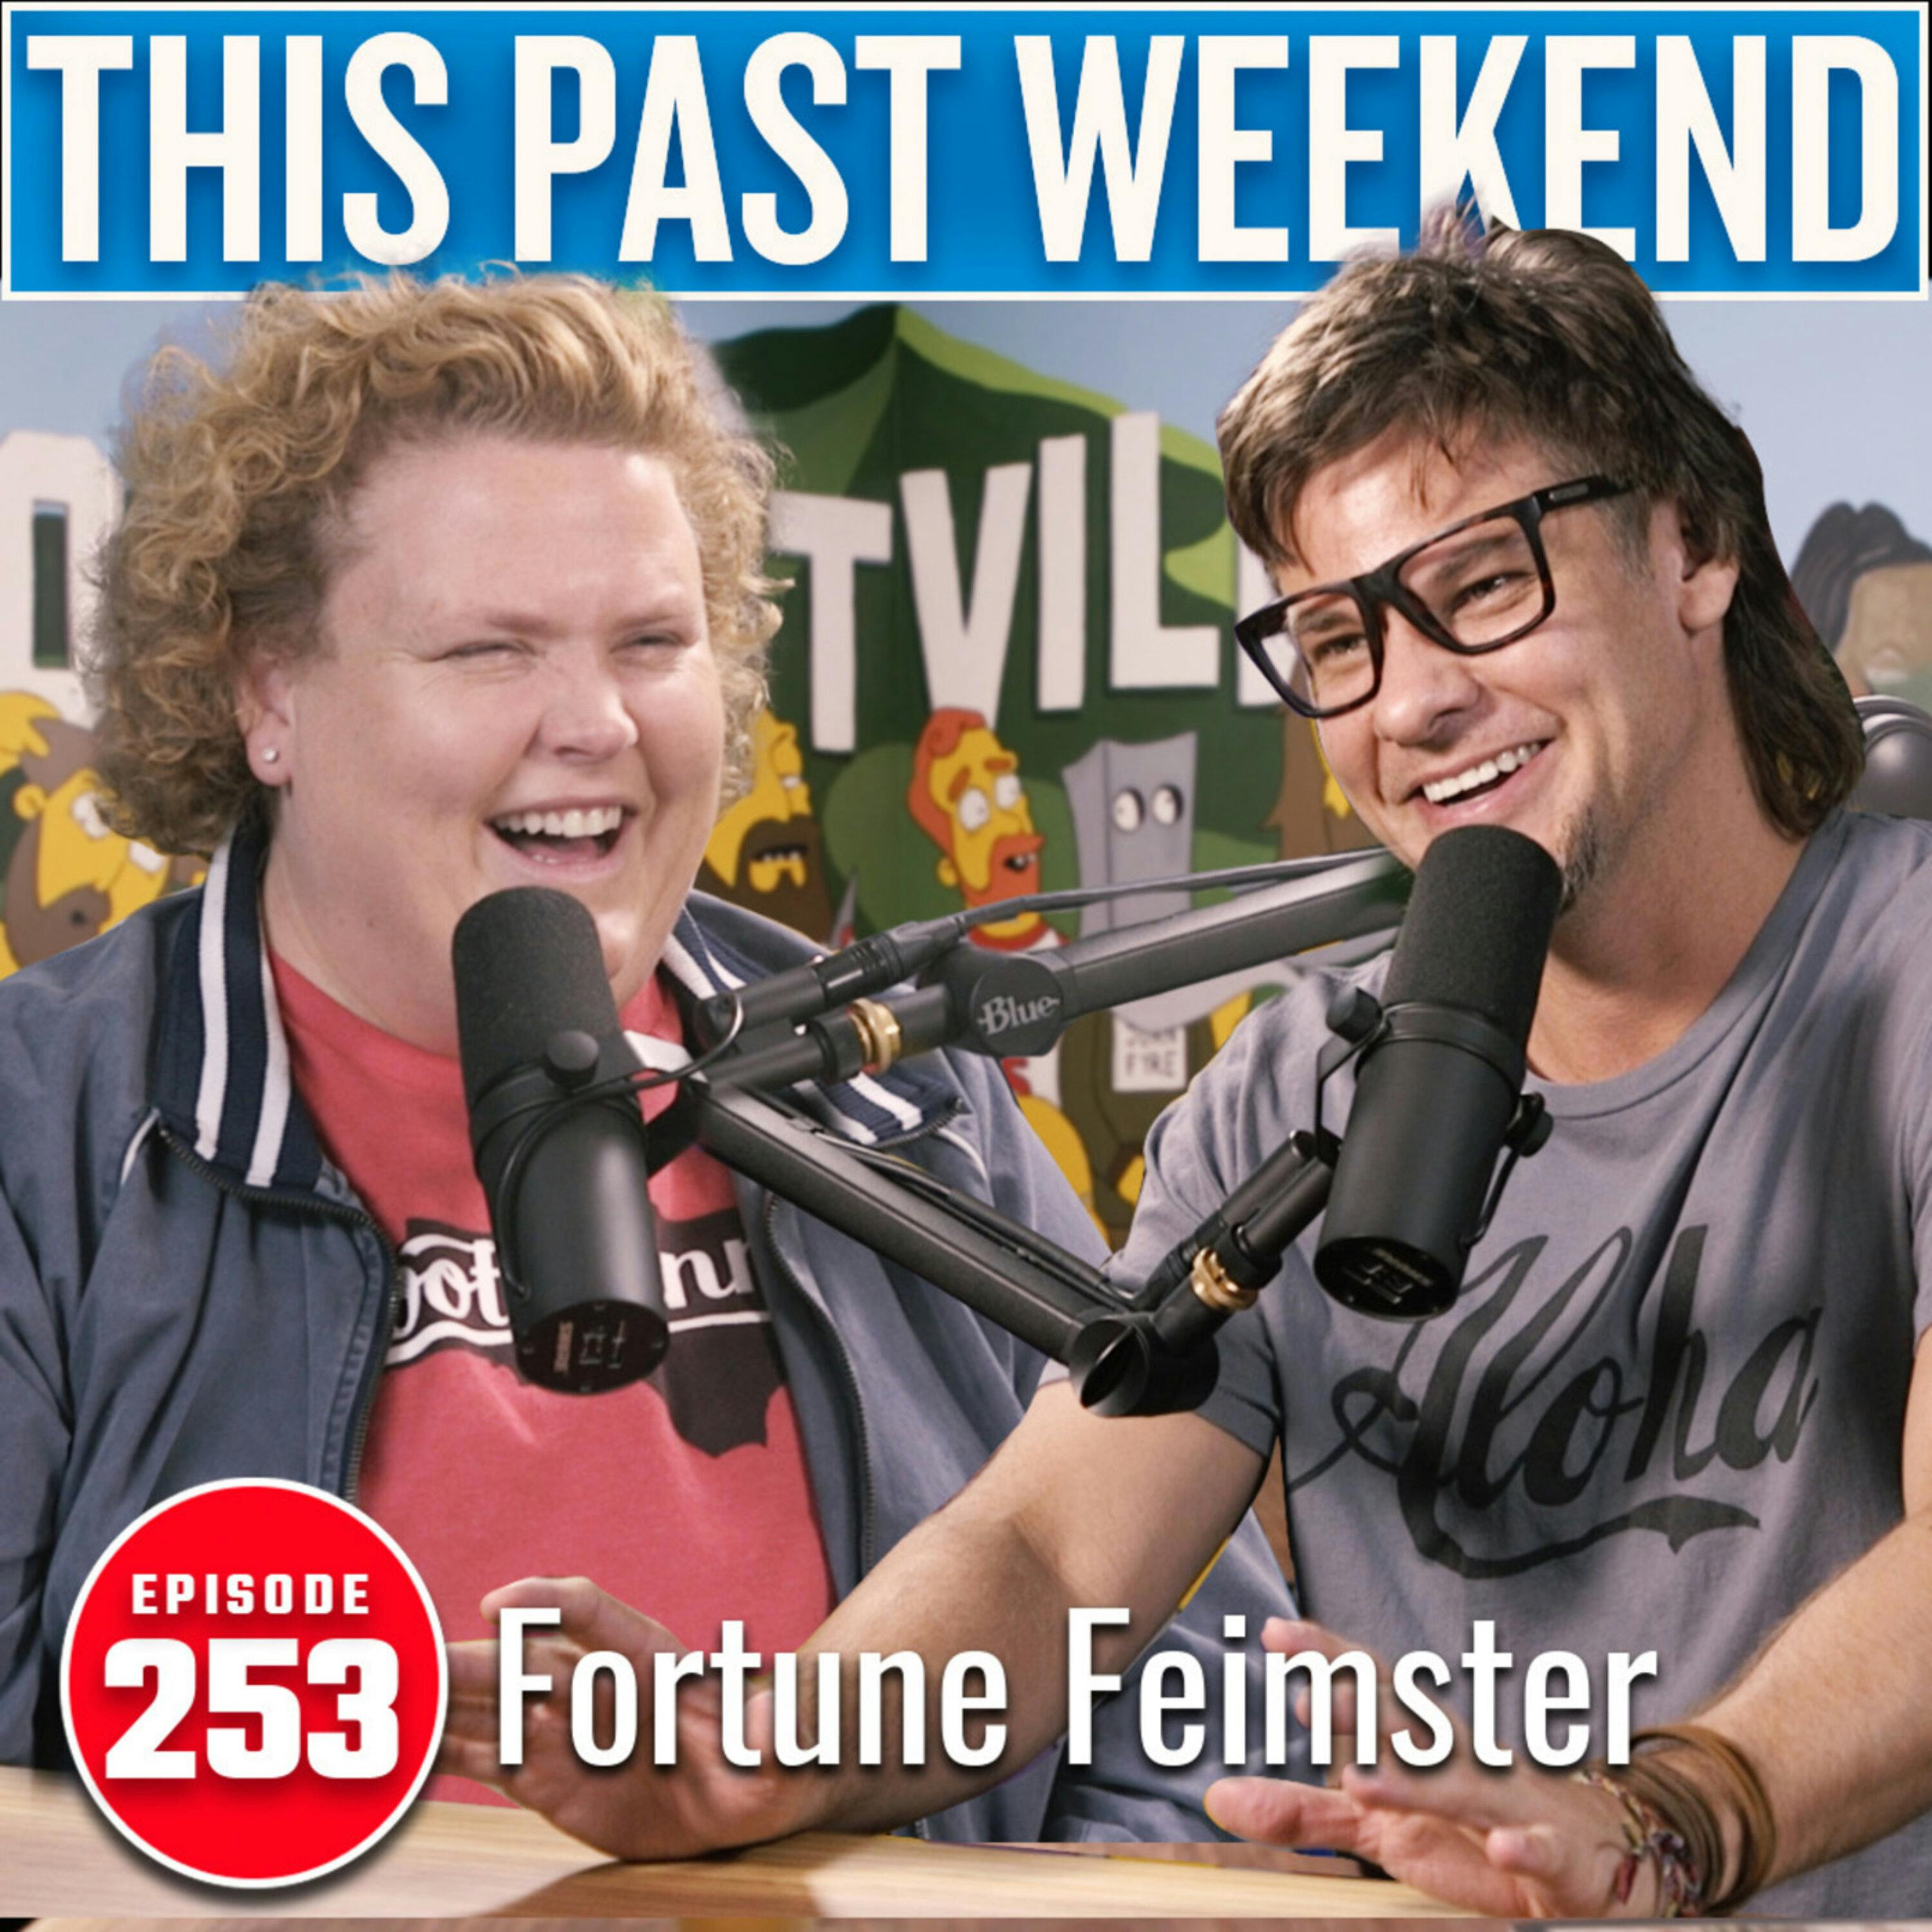 Fortune Feimster | This Past Weekend #254 by Theo Von